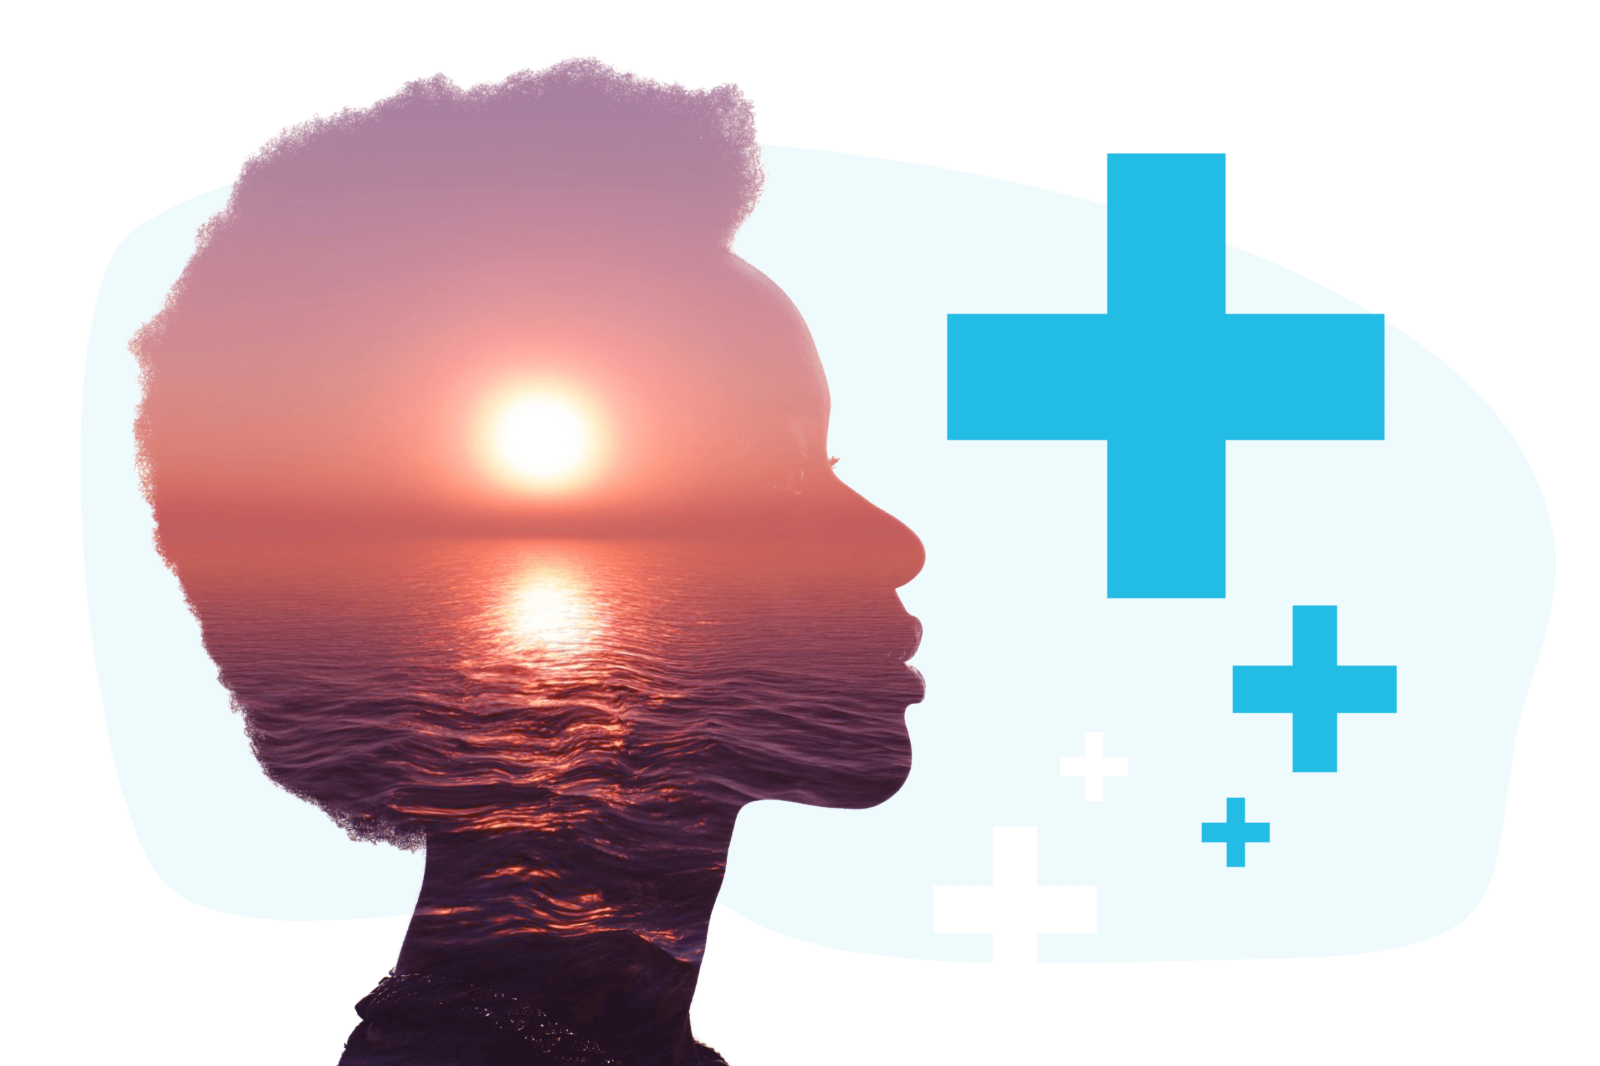 A silhouette of a woman's head with an ocean sunset and calm waters filling the shape.